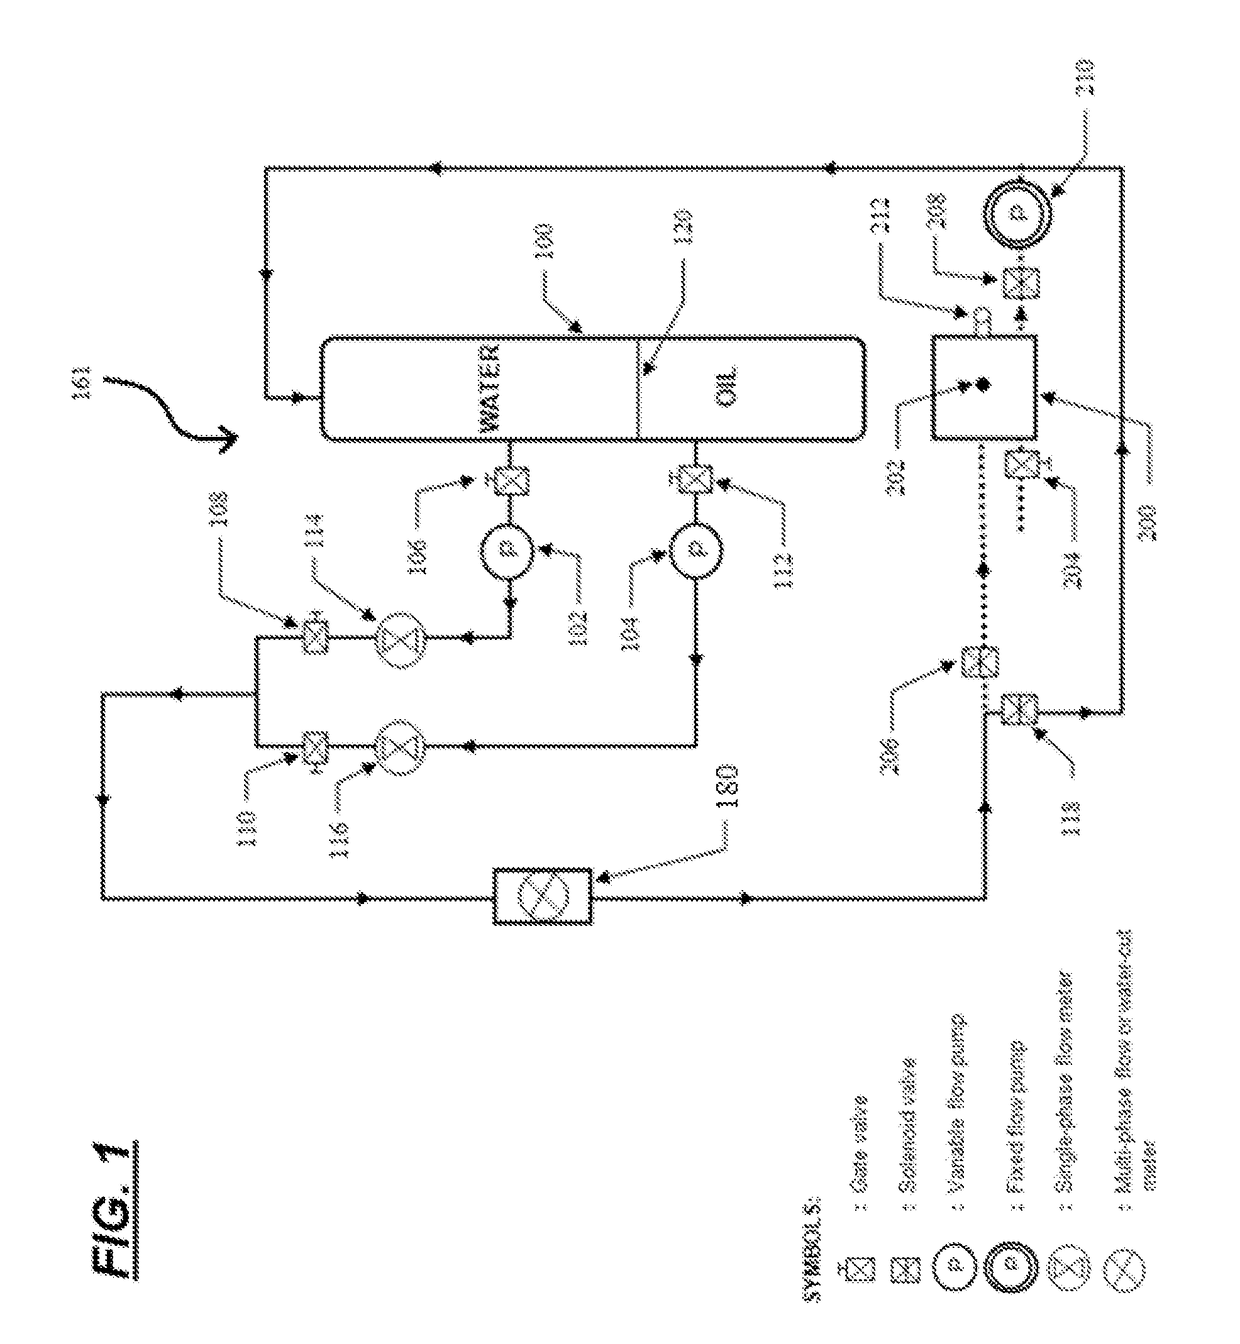 Multiphase meter calibration system and methods thereof